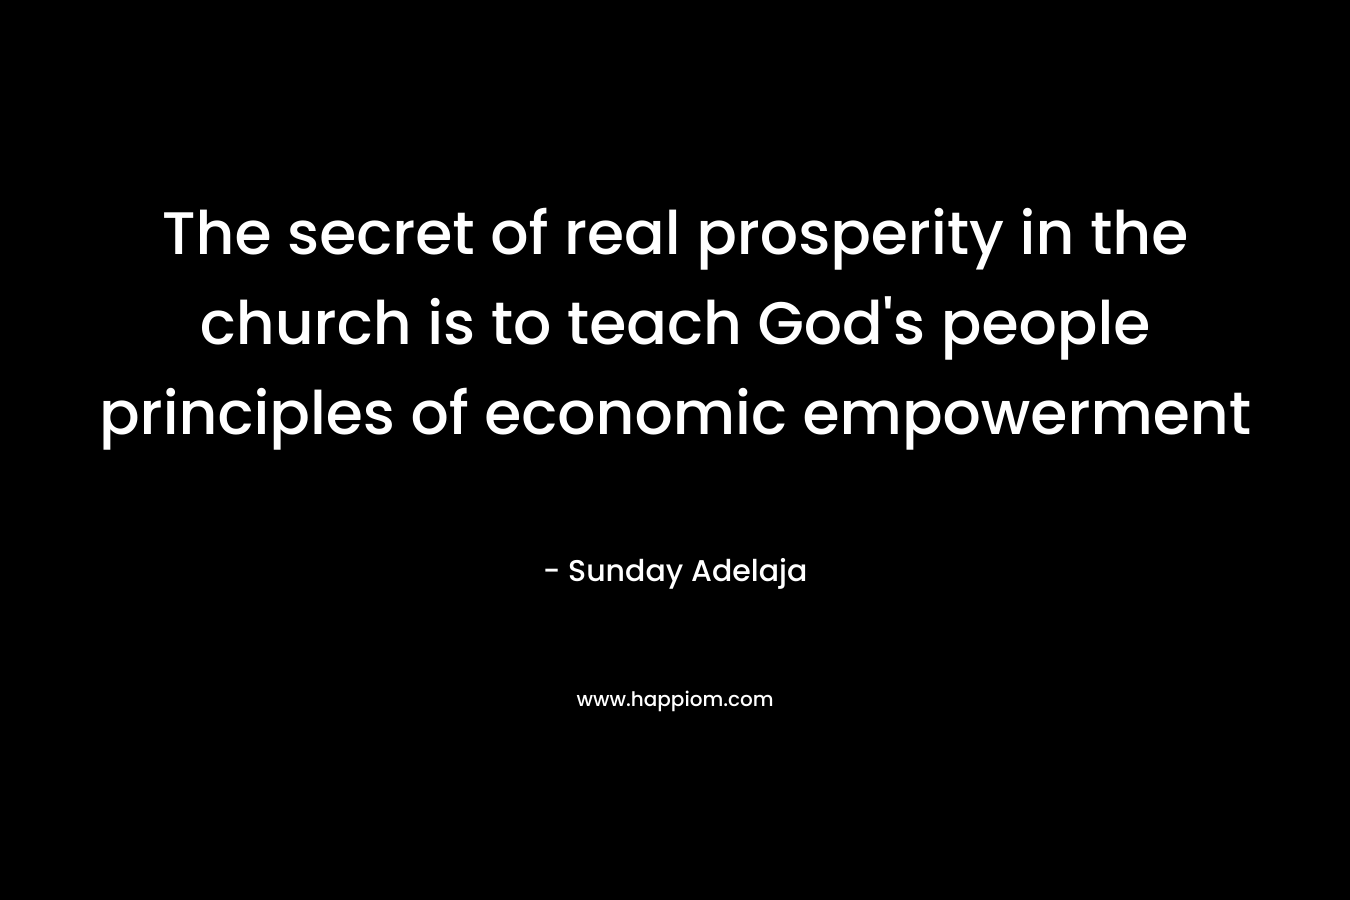 The secret of real prosperity in the church is to teach God’s people principles of economic empowerment – Sunday Adelaja